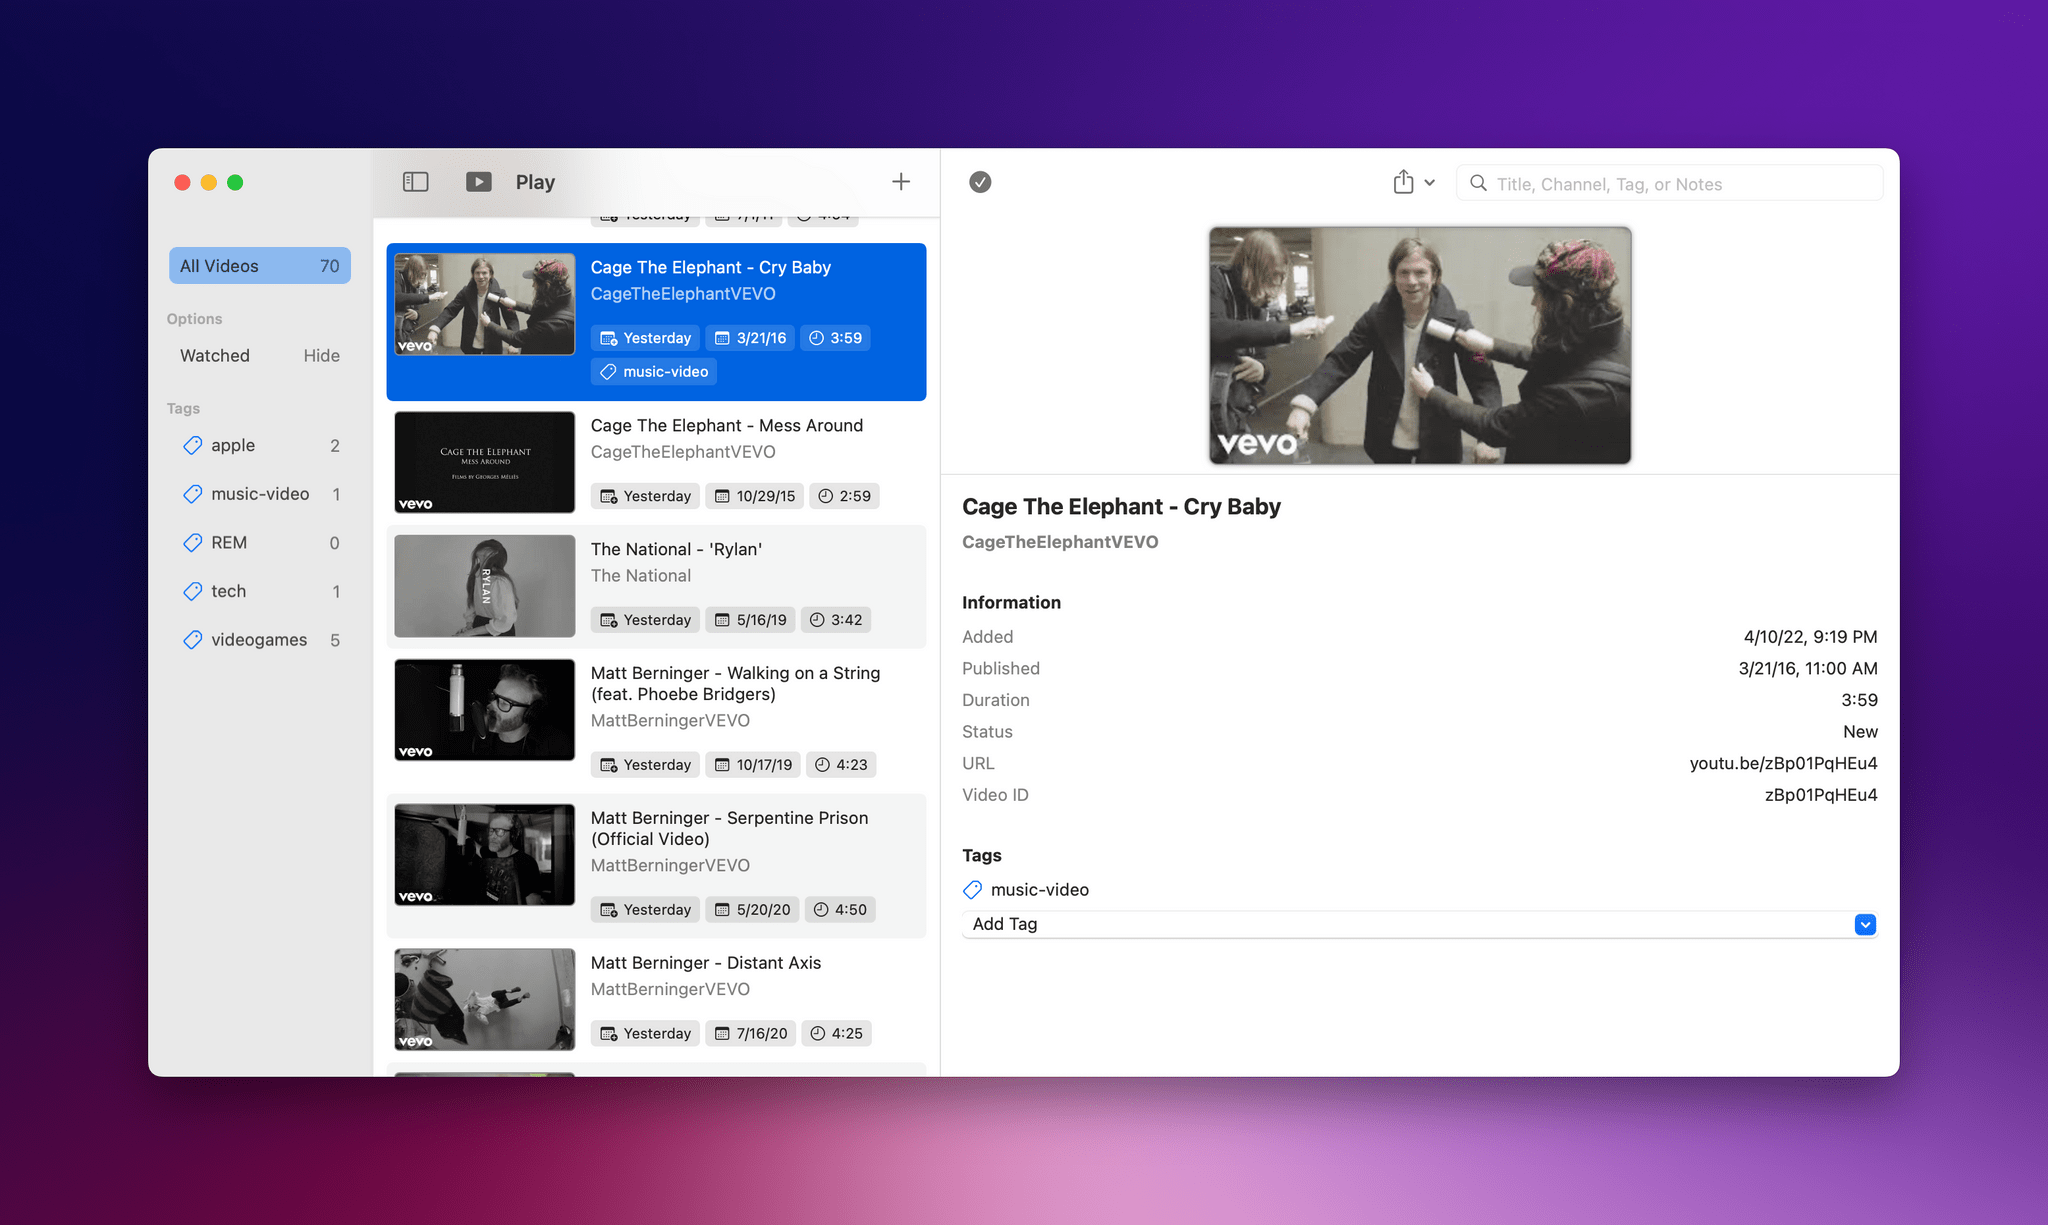 The elegance of myTunes is that all I have to do is tag music videos with 'music-video' as I add them to Play. Shortcuts and Channels do the rest.